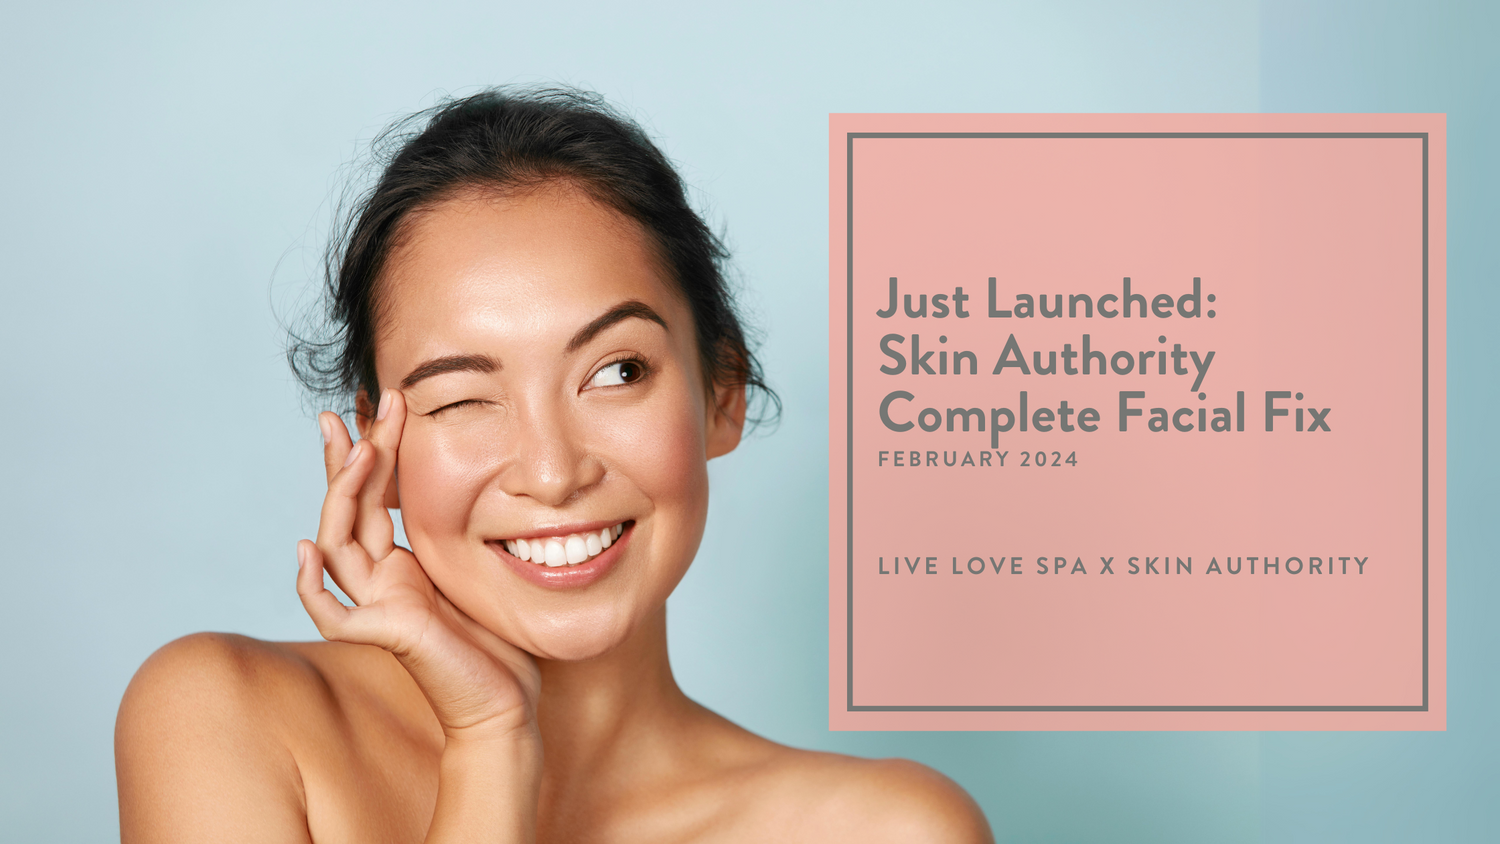 Just Launched: Skin Authority Complete Facial Fix